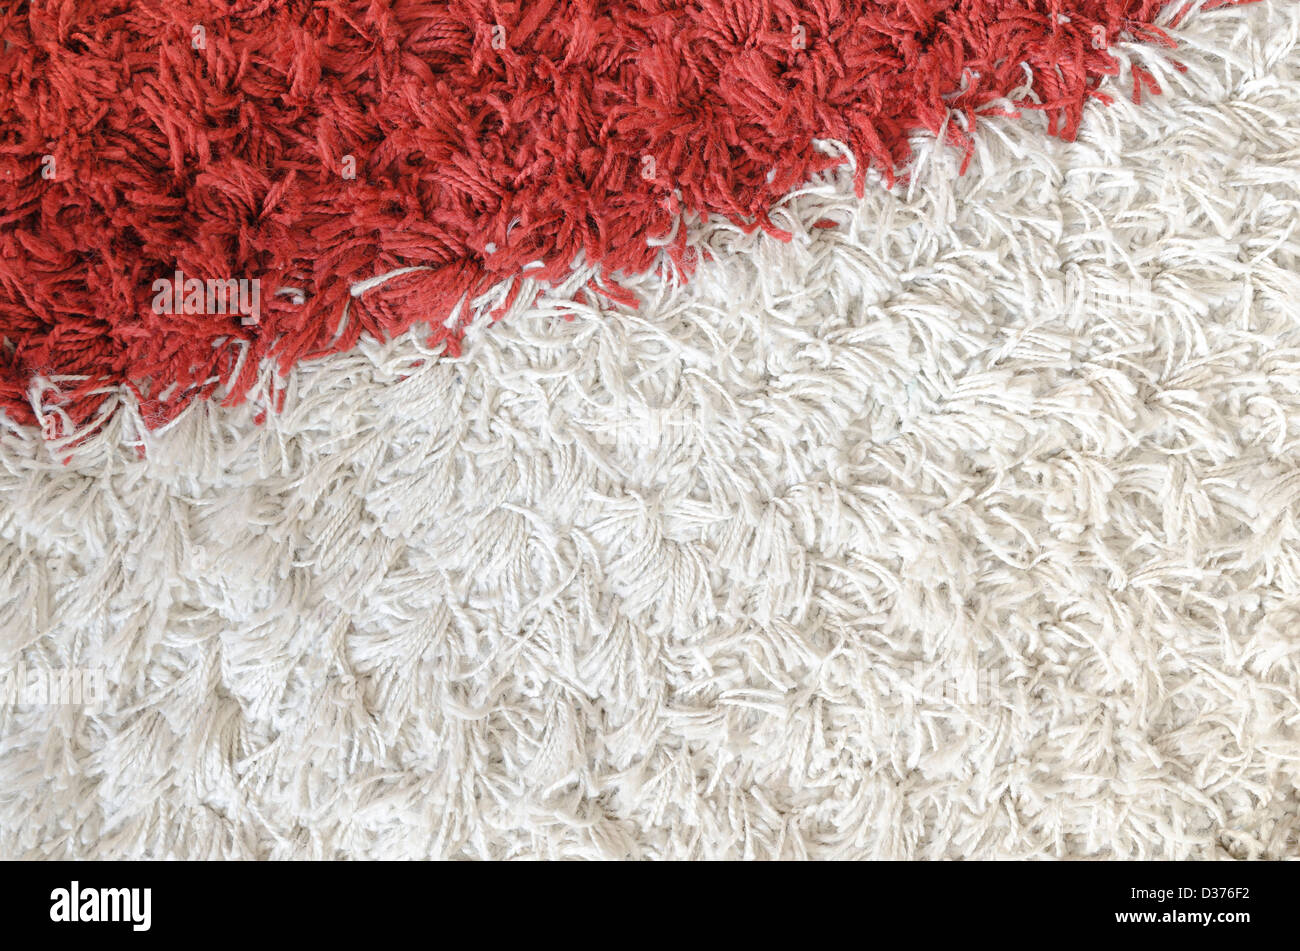 detailed carpet background with white and red colors Stock Photo